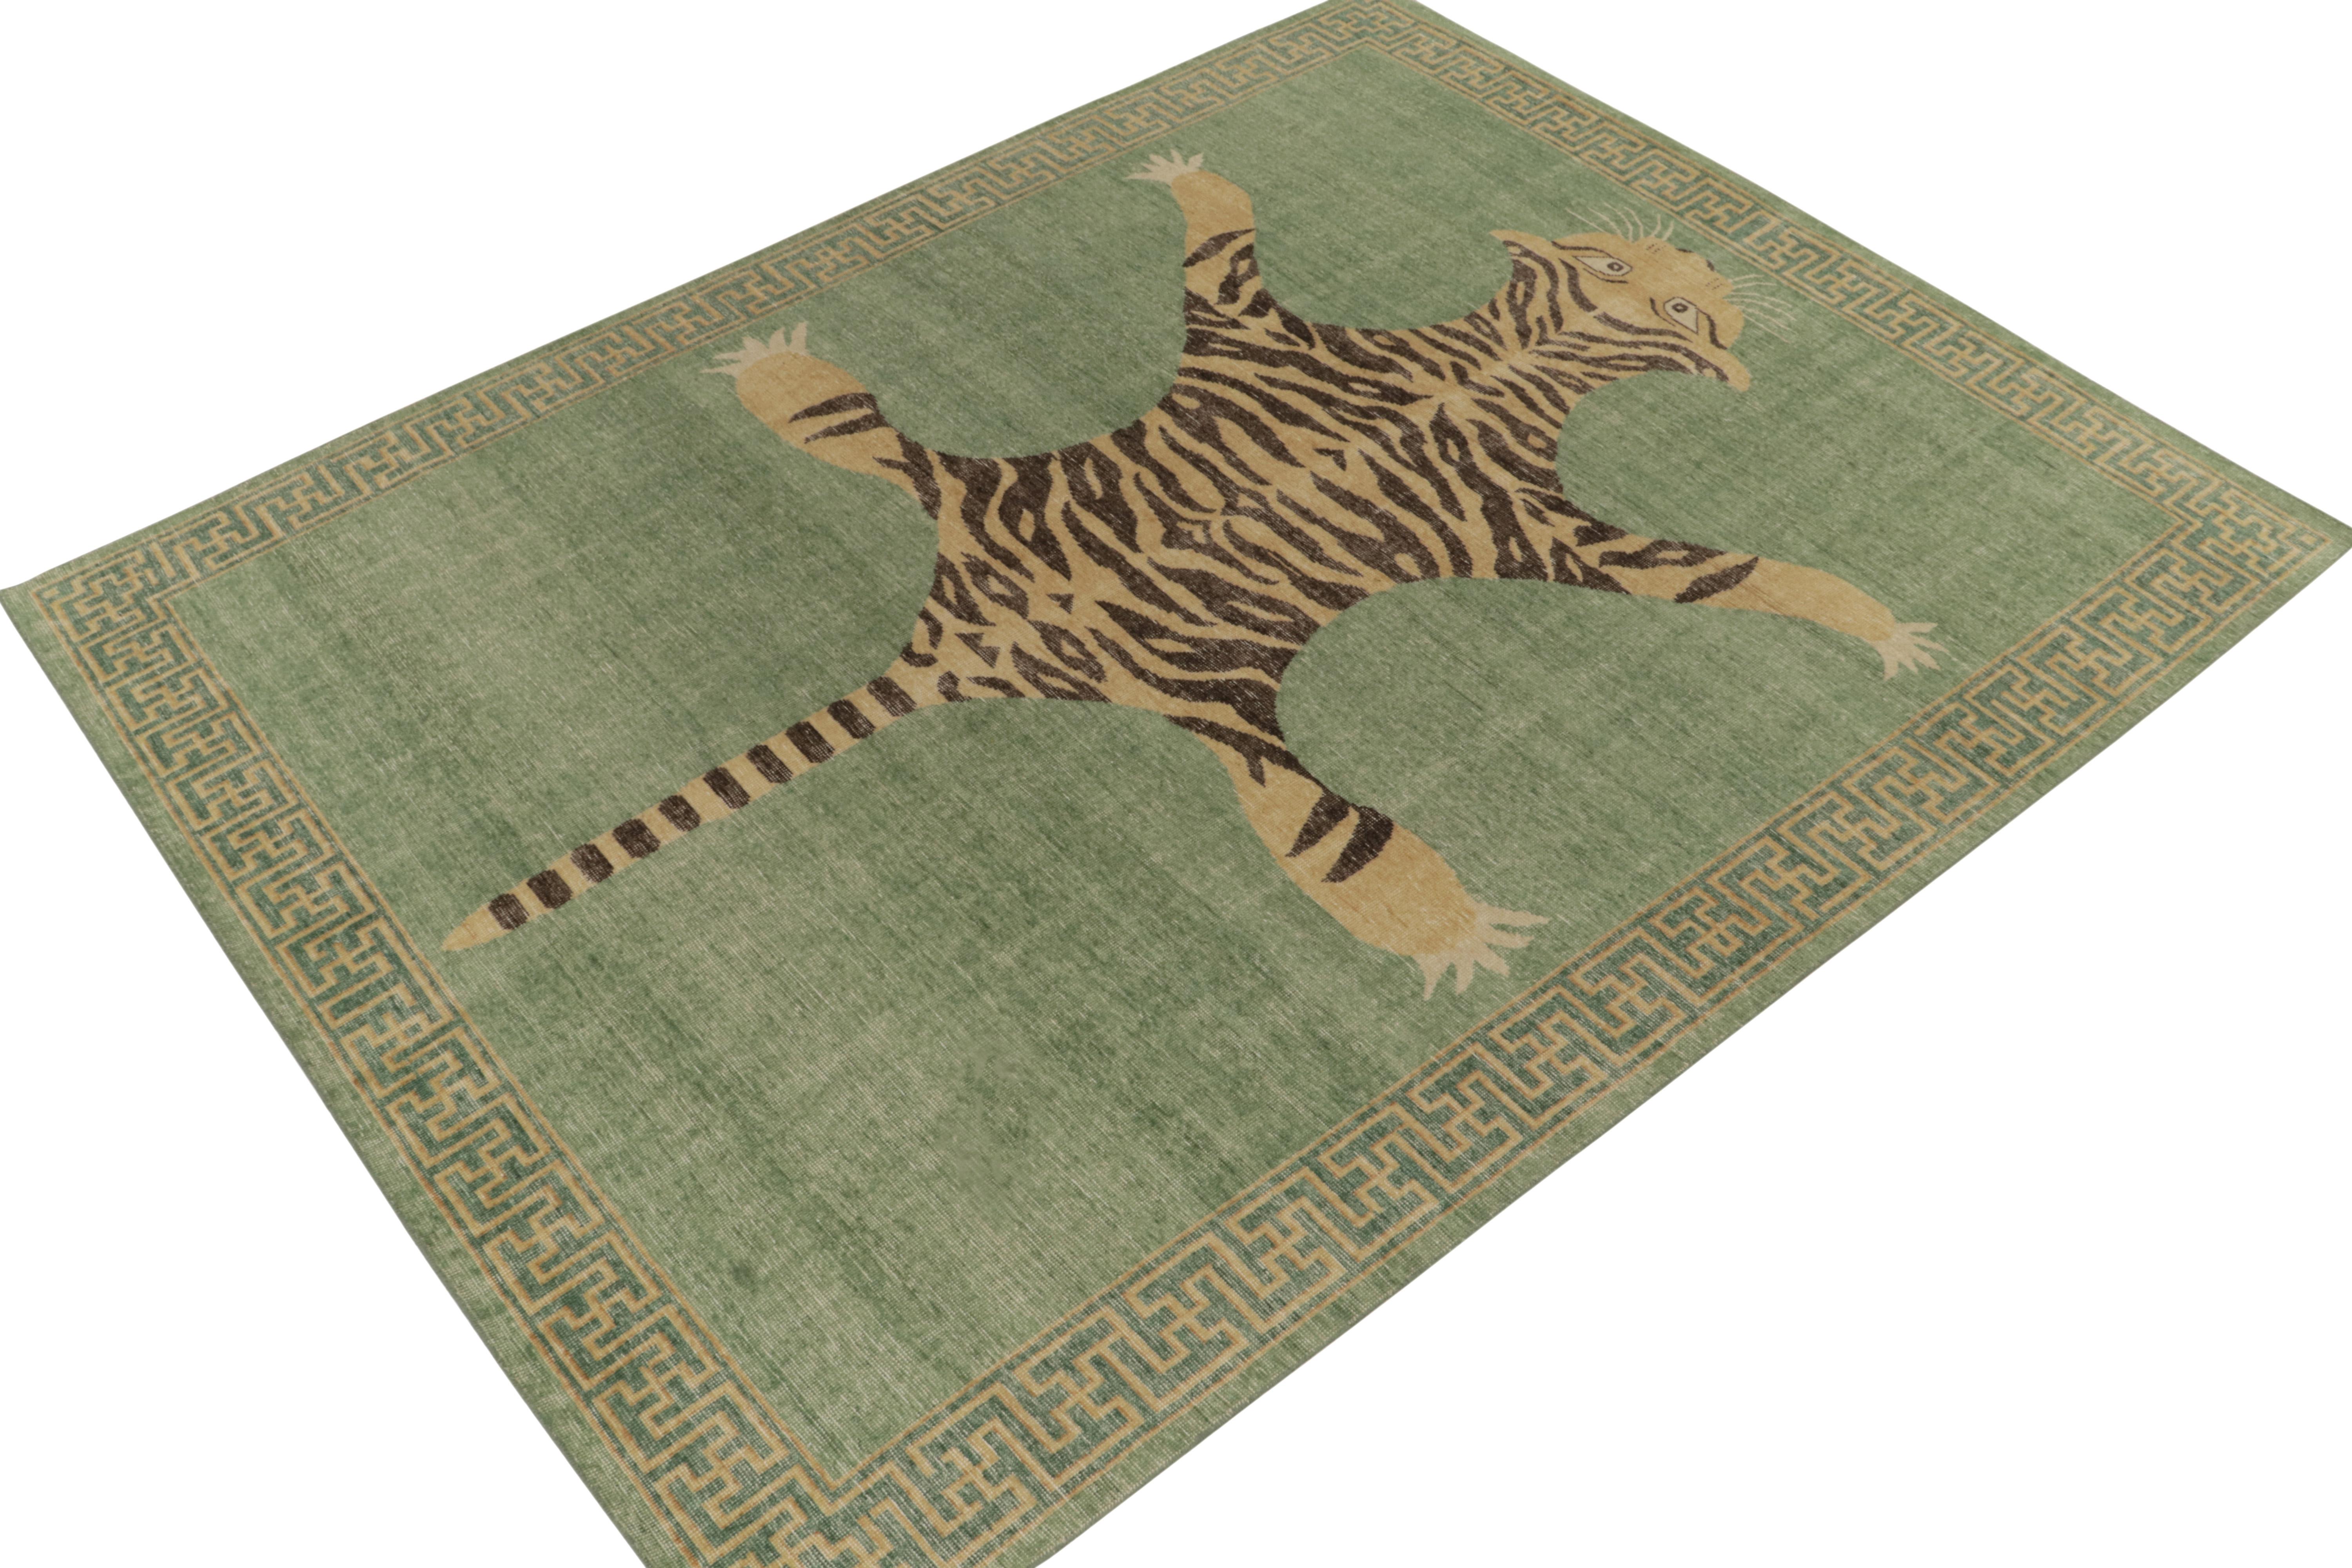 From Rug & Kilim’s Homage Collection, a 9x12 hand-knotted wool piece recapturing the time-honored Tiger skin rug in its glory. 

On the Design: This piece is inspired by antique Indian Tiger-skin rugs of the most regal, inviting presence. Tones of